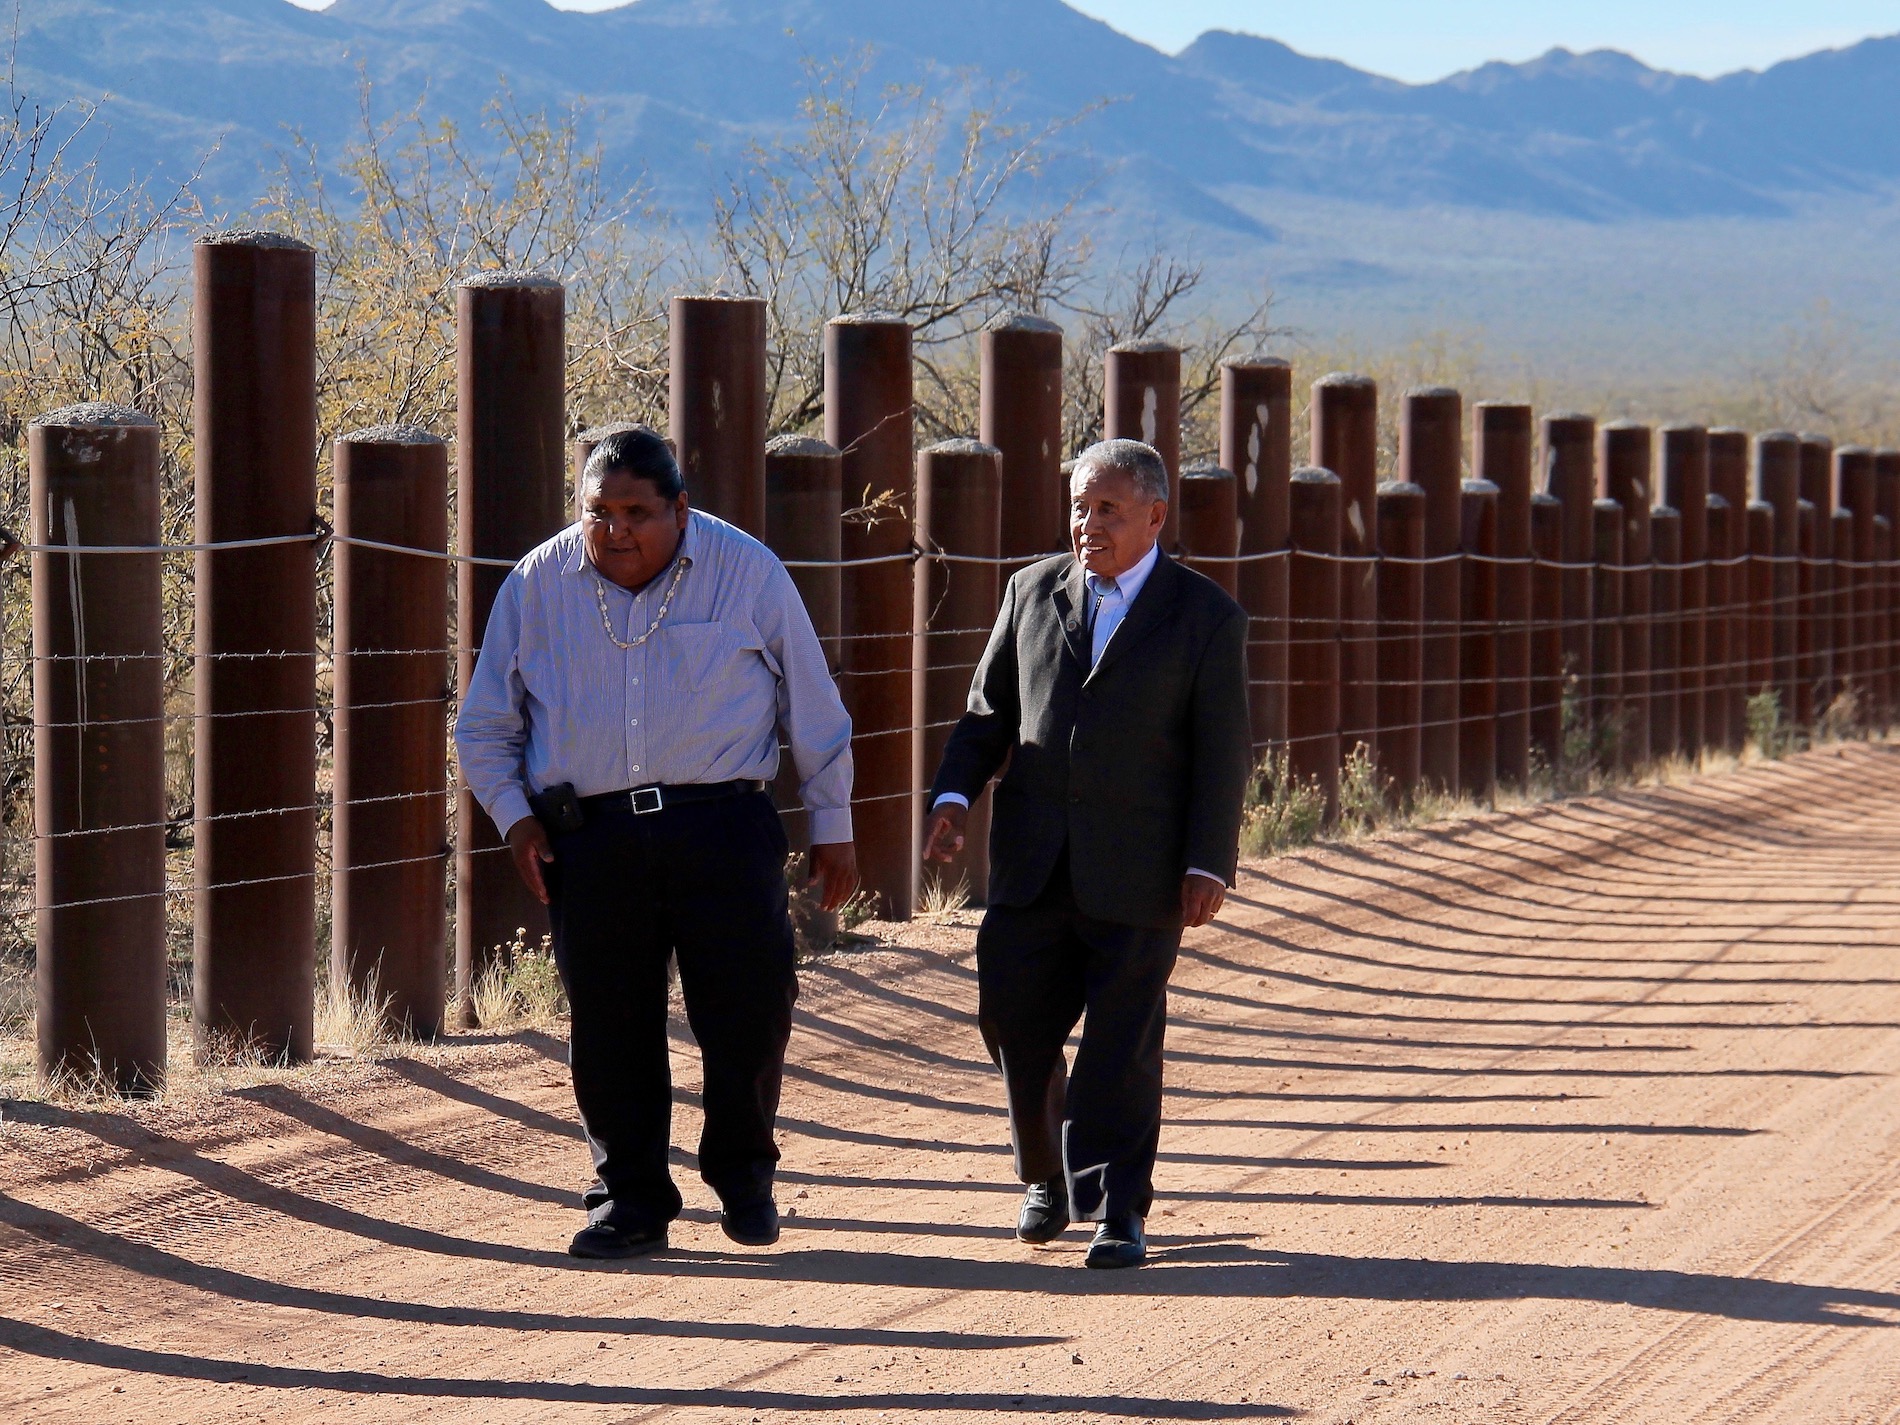 For Native Americans, US-Mexico border is an 'imaginary line'